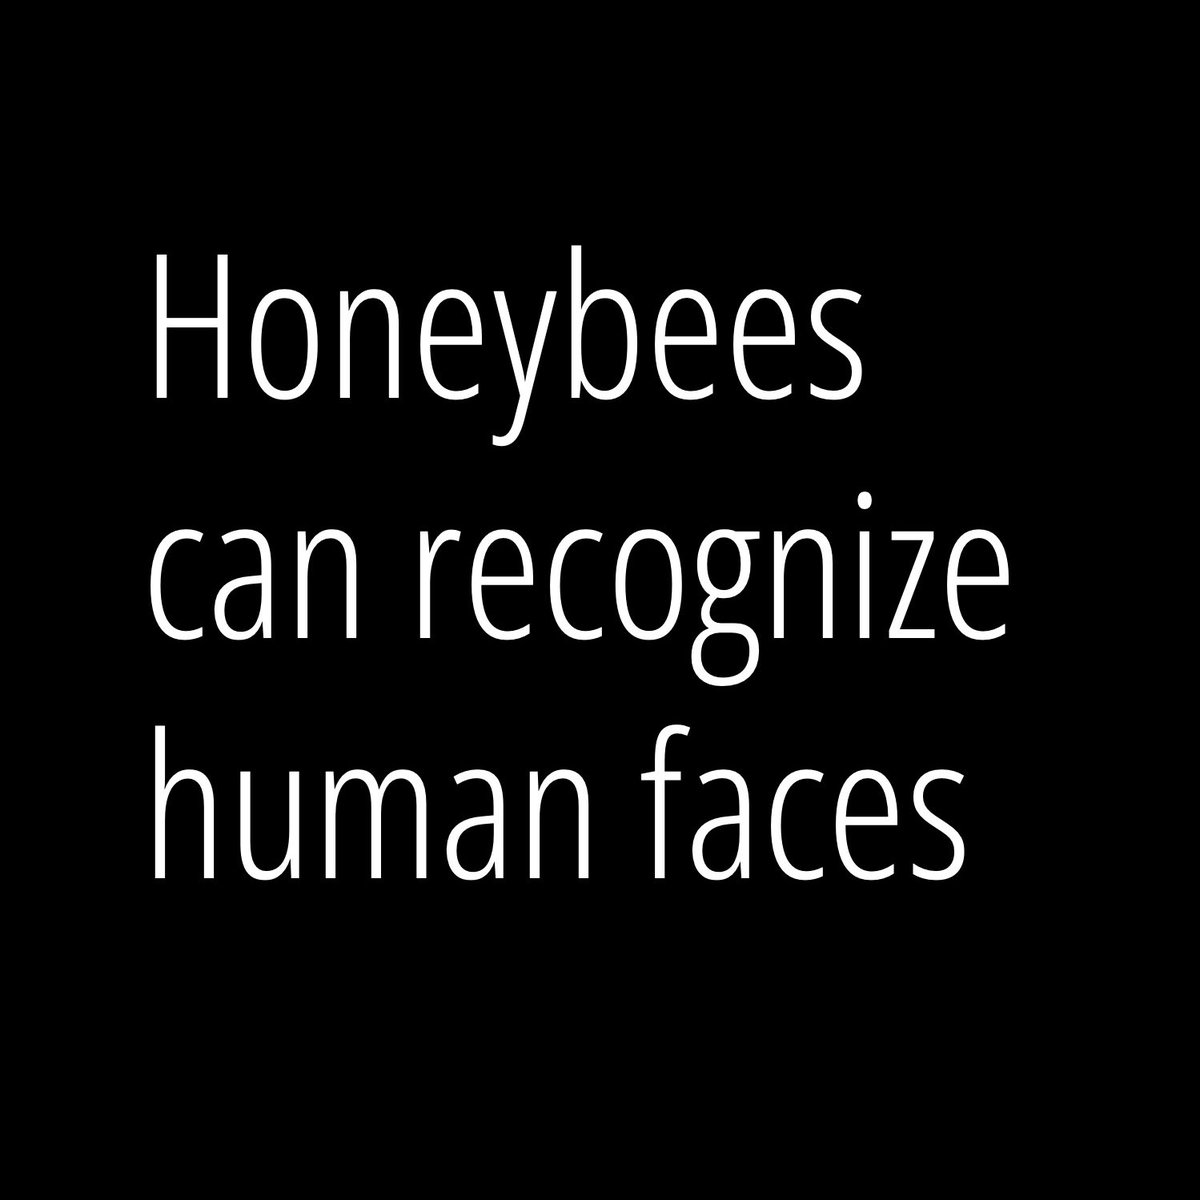 Did you know honeybees can recognise human faces?